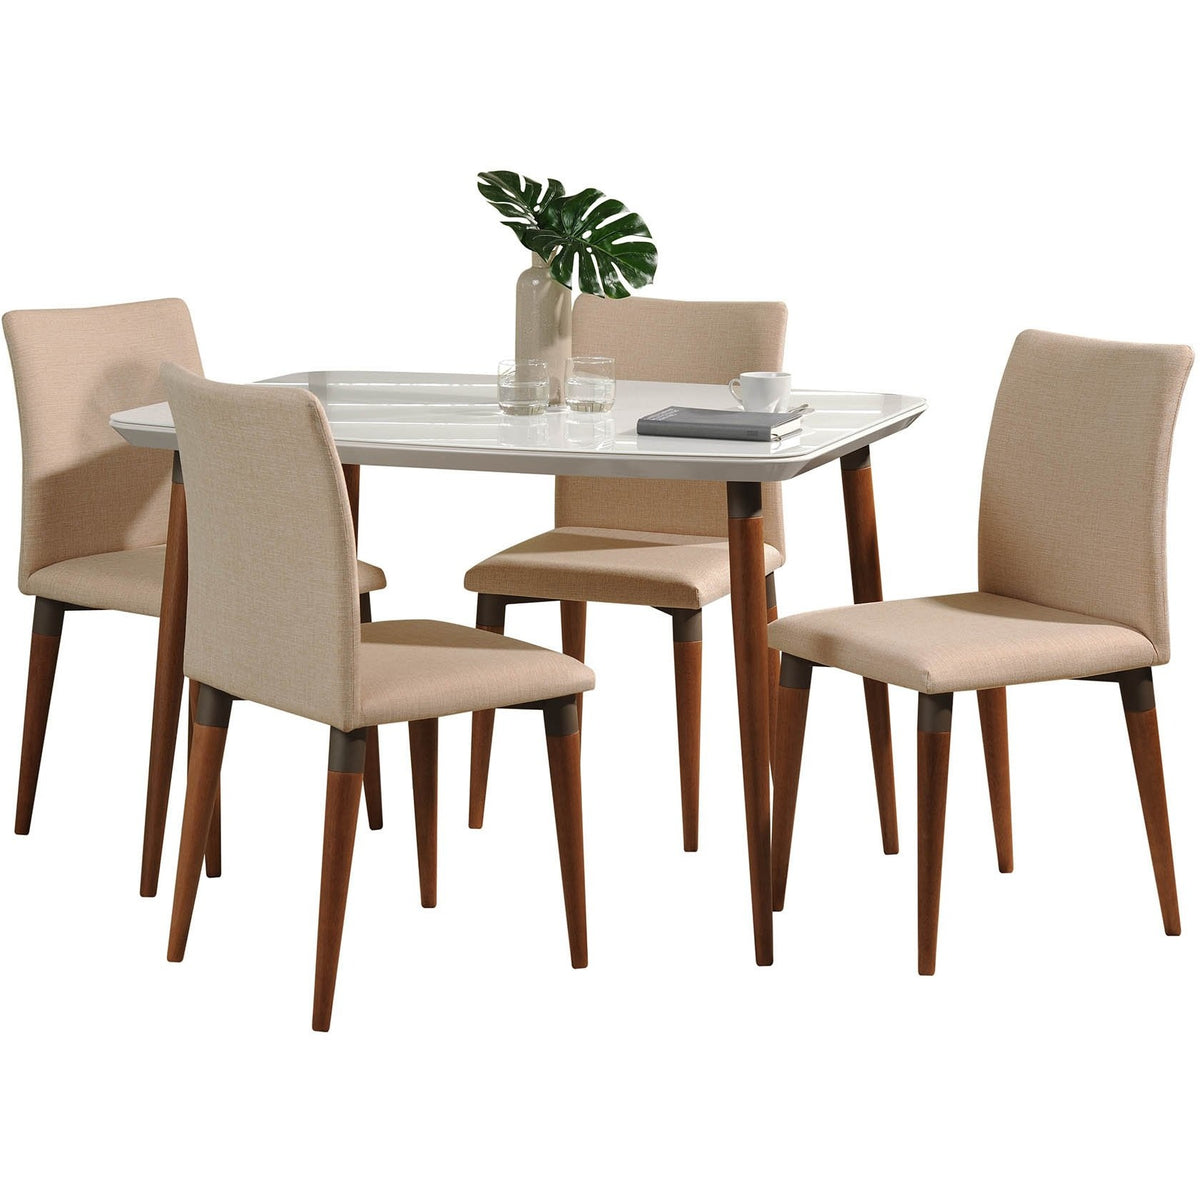 Manhattan Comfort 5-Piece Charles 45.27" Dining Set with 4 Dining Chairs in White Gloss and Dark Beige-Minimal & Modern